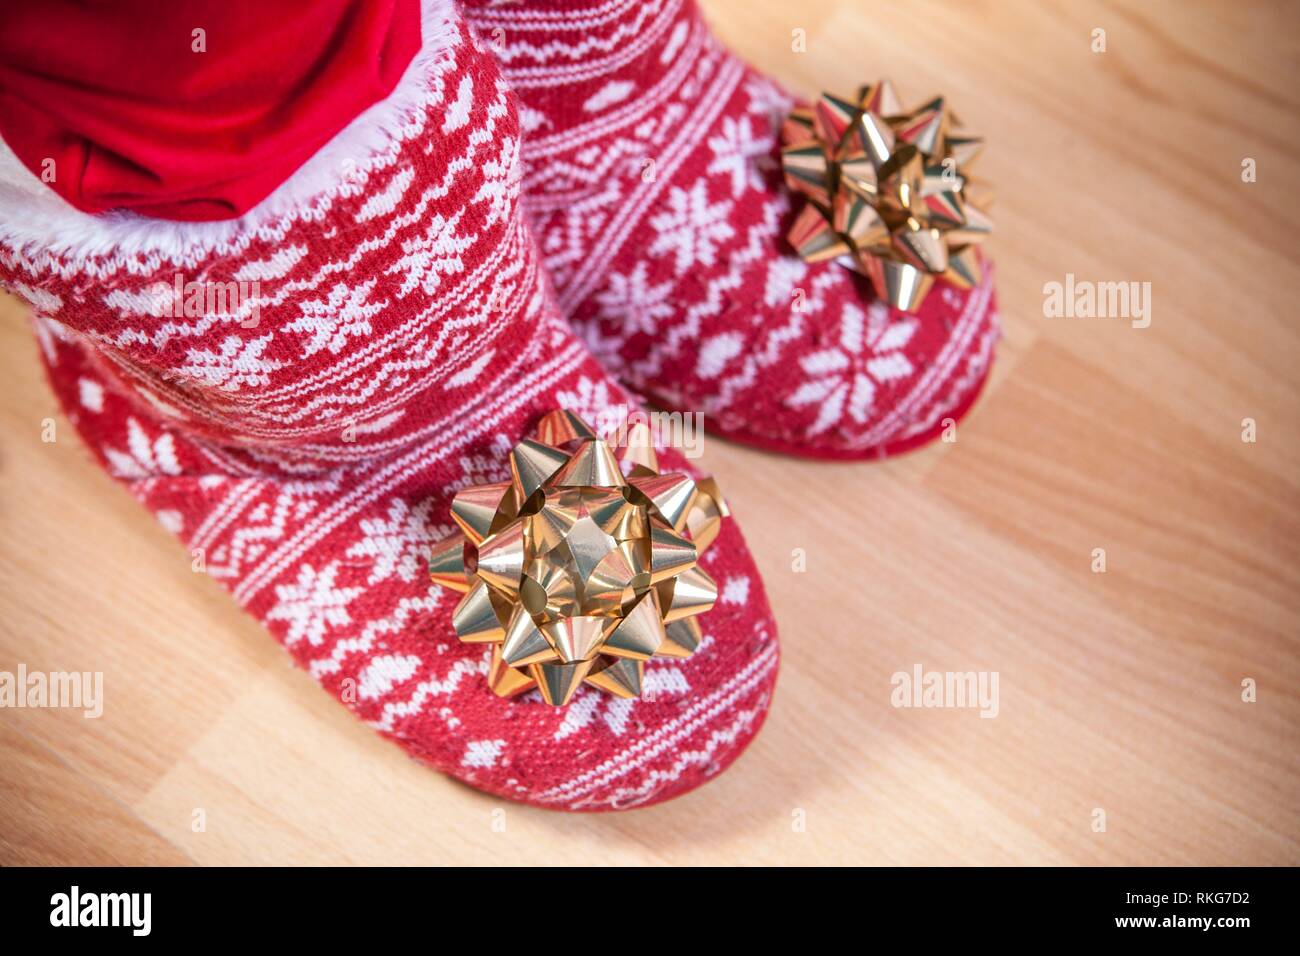 Red knitted boots with fur full of ribbons over wooden floor. Christmas staff concept. Stock Photo